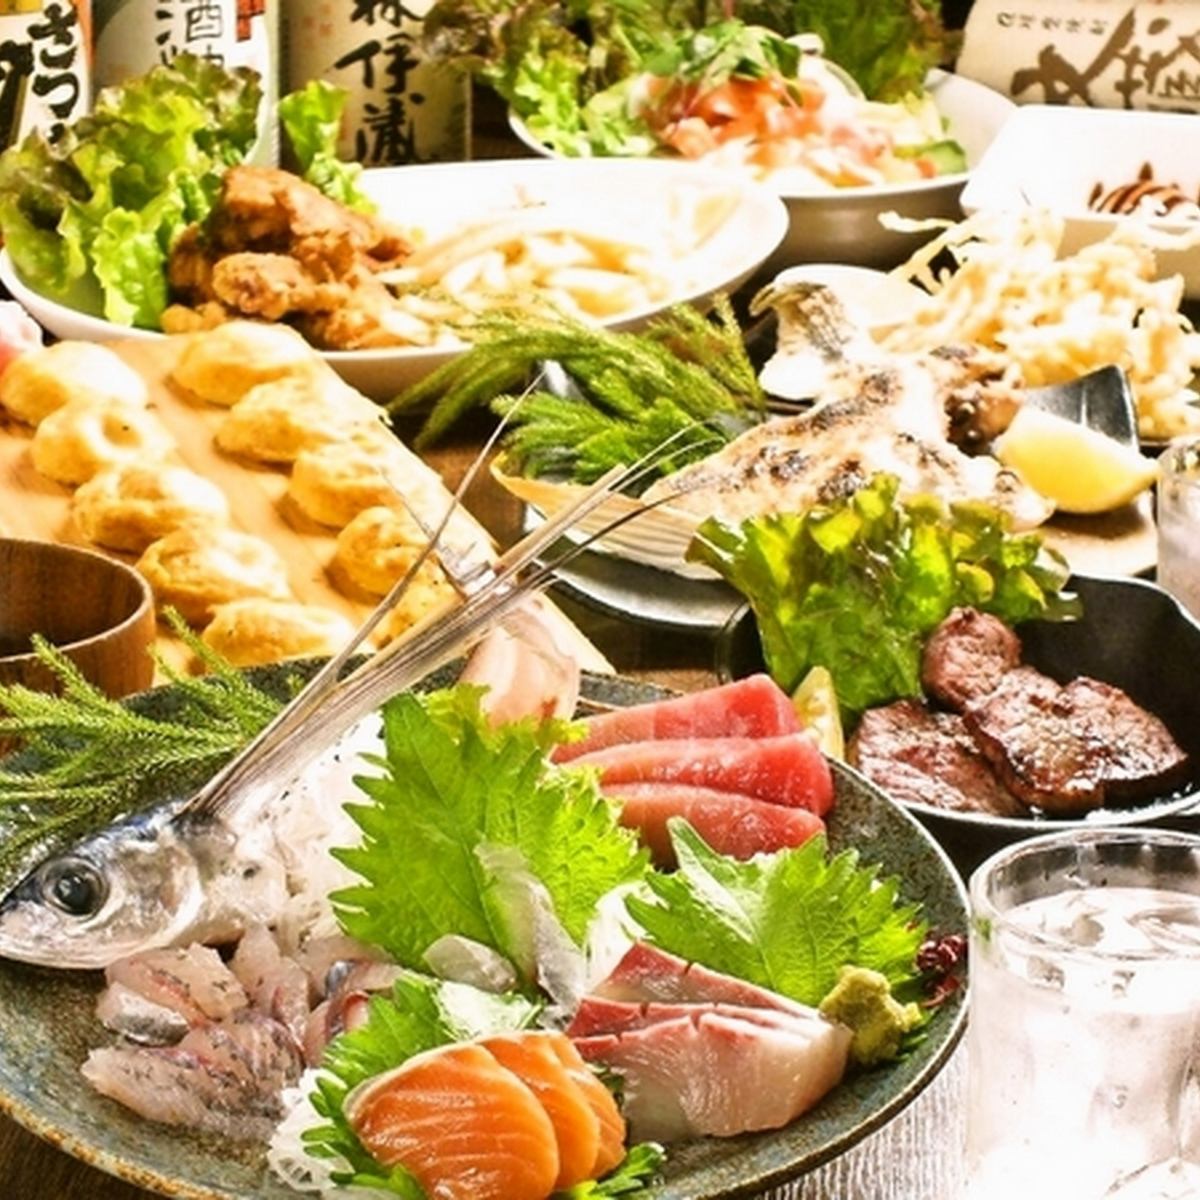 A craftsman who specializes in fish dishes! The seafood menu will be greatly enhanced in the future